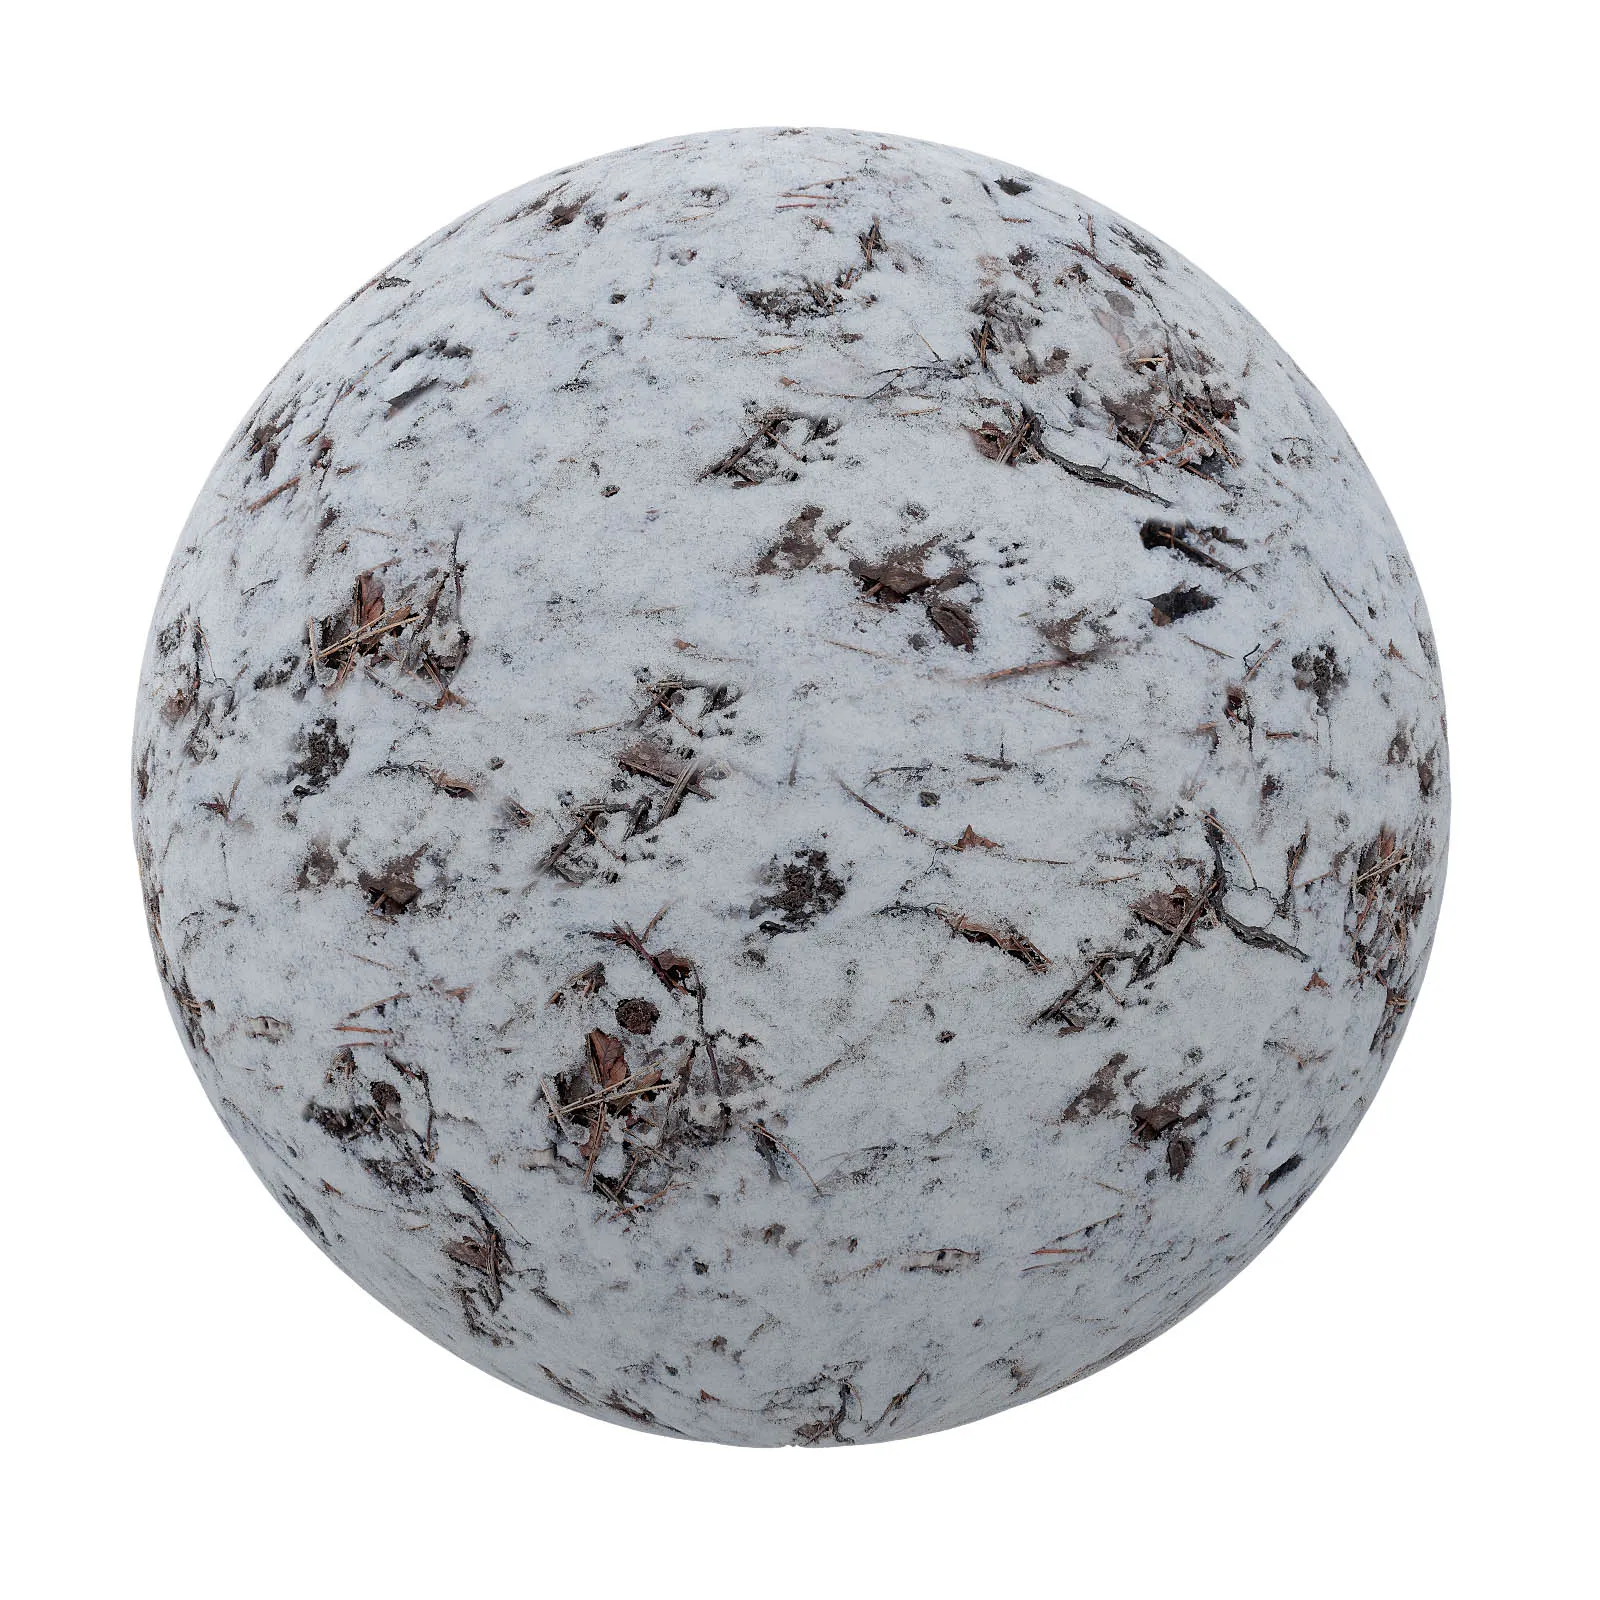 PBR CGAXIS TEXTURES – SNOW – Snow With Forest Litter